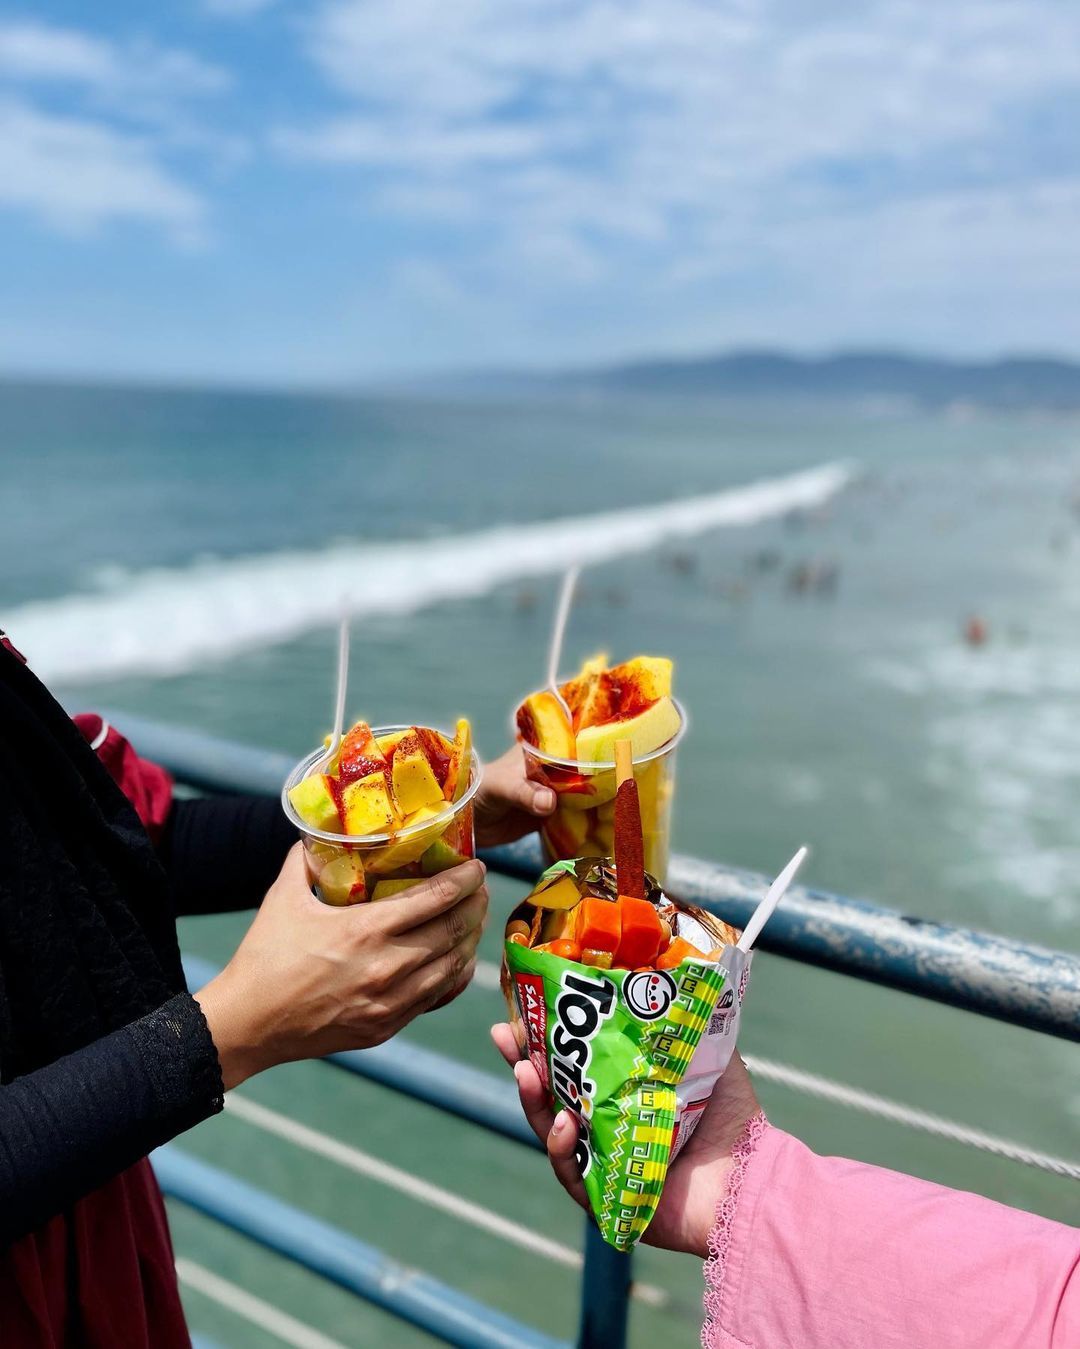 #TastyTuesday: Spicy fruit on a hot summer day hits differently... 🌶️  📸: @hiijabtales
.
.
.
#santamonica #santamonicapier #pacpark #pacificpark #foodie